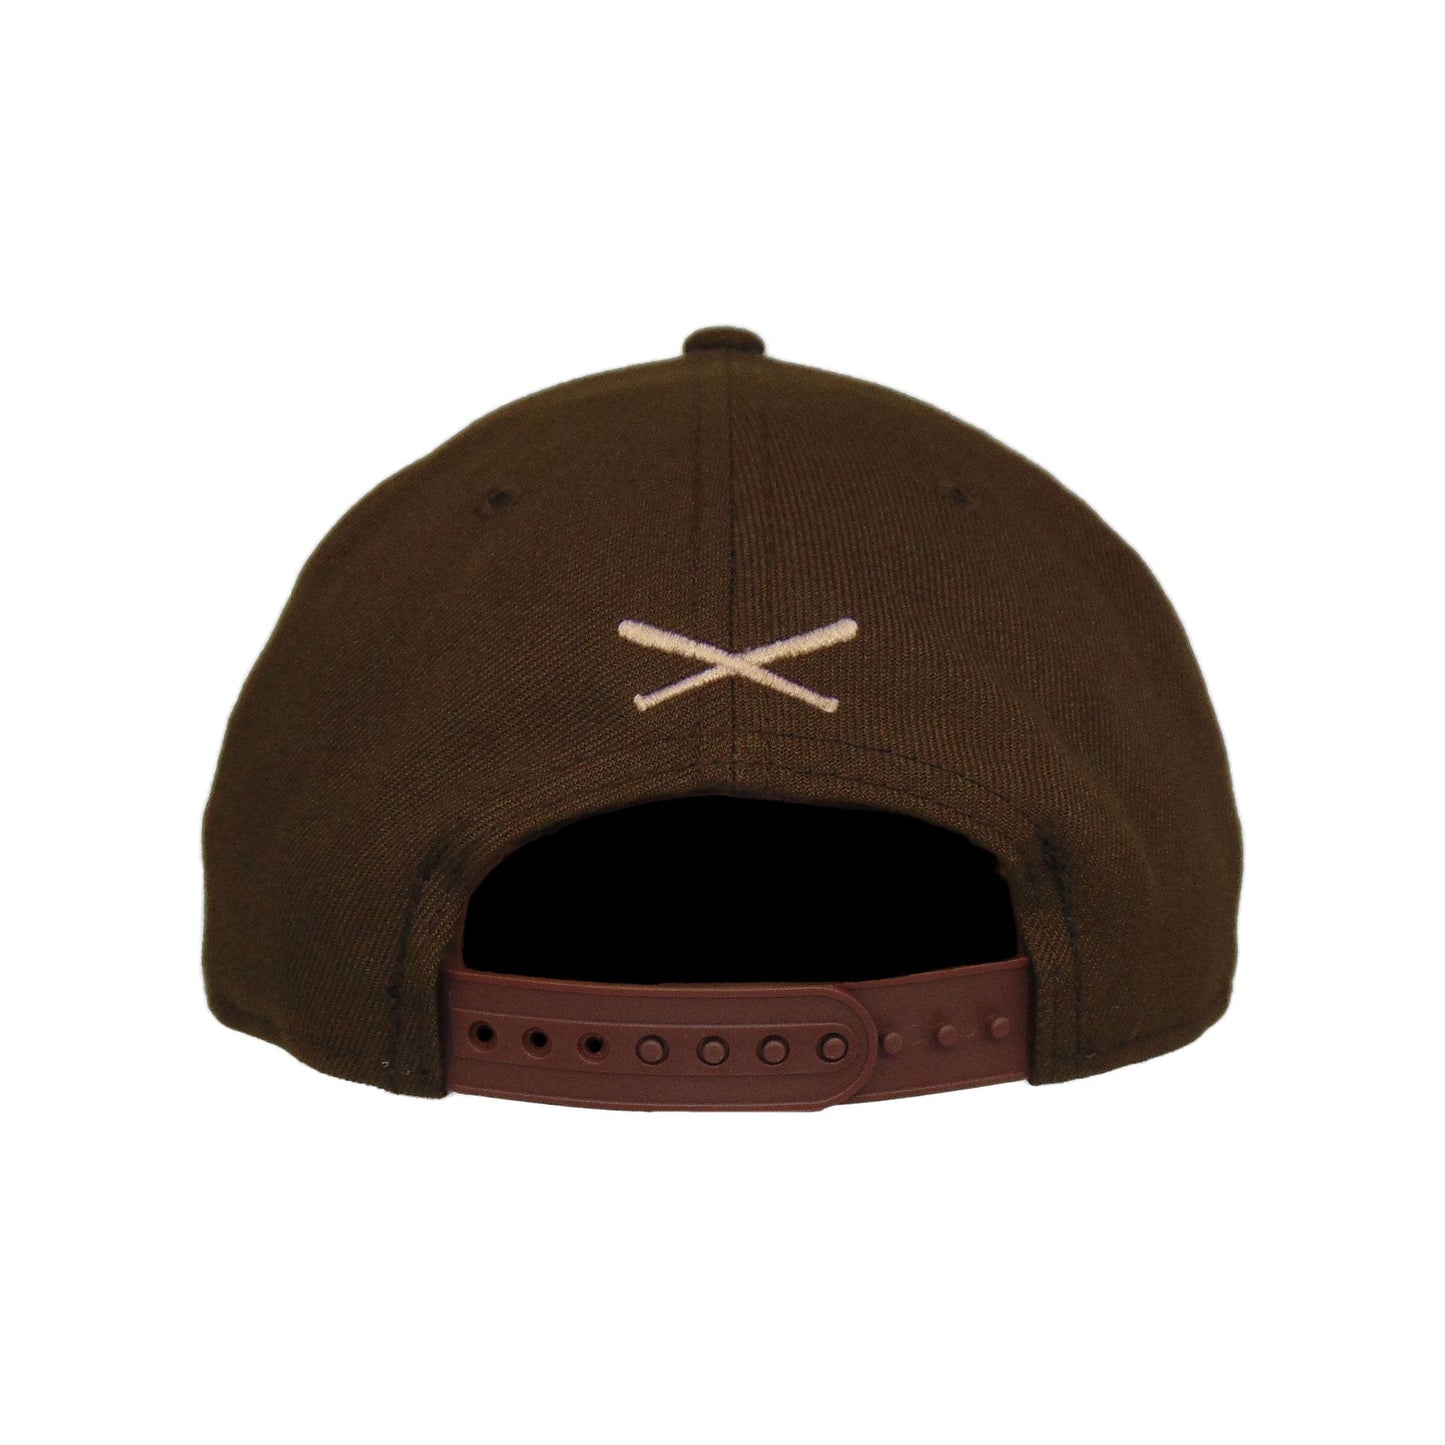 Justfitteds Crossed Bats 9FIFTY New Era Cap Snapback Brown